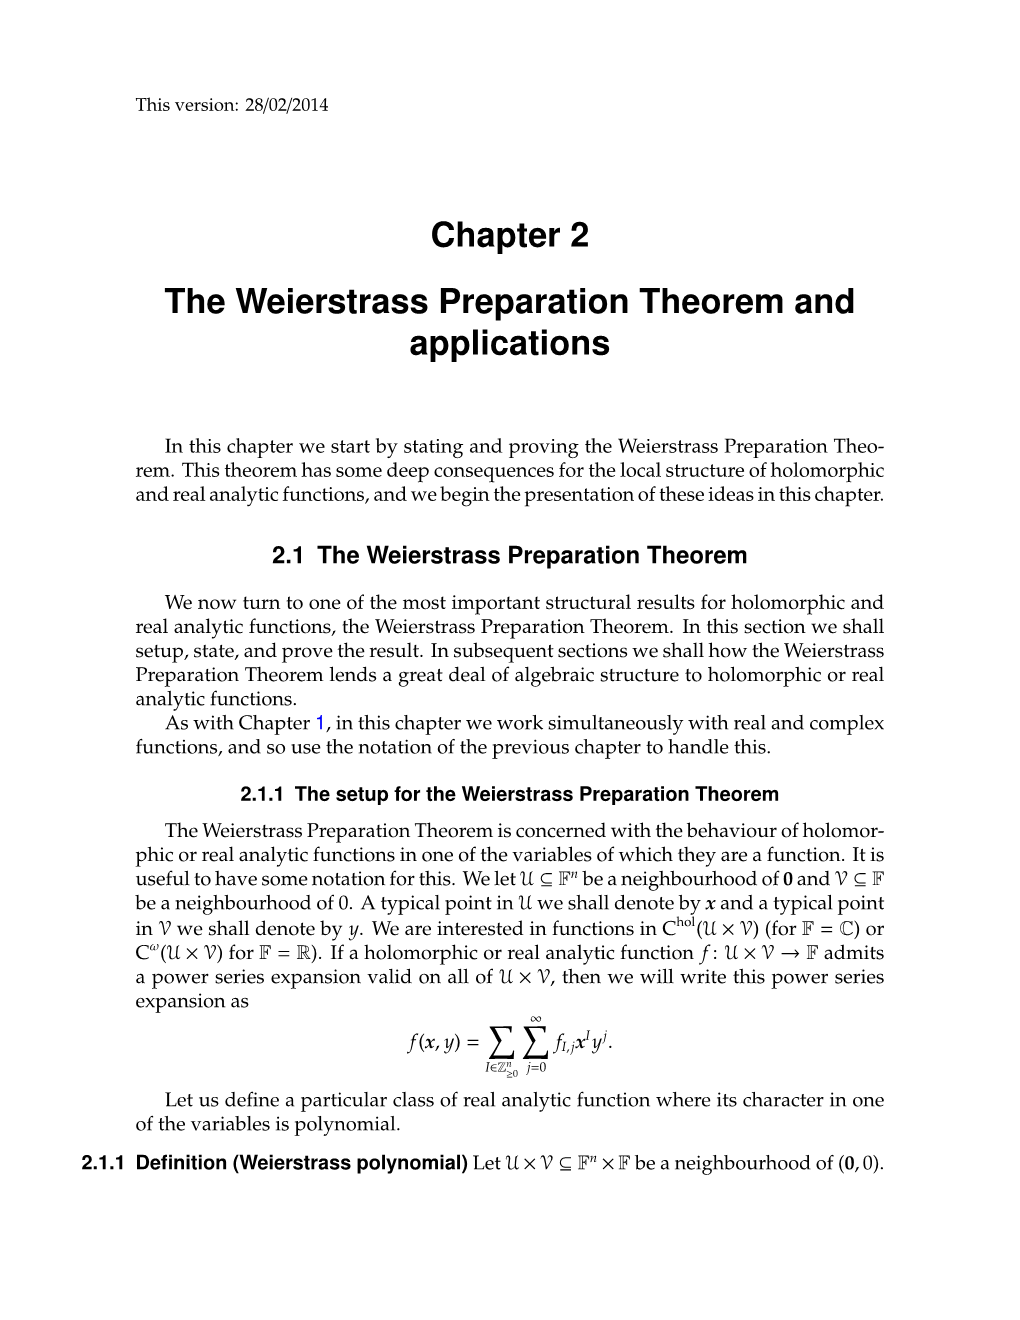 Chapter 2 the Weierstrass Preparation Theorem and Applications